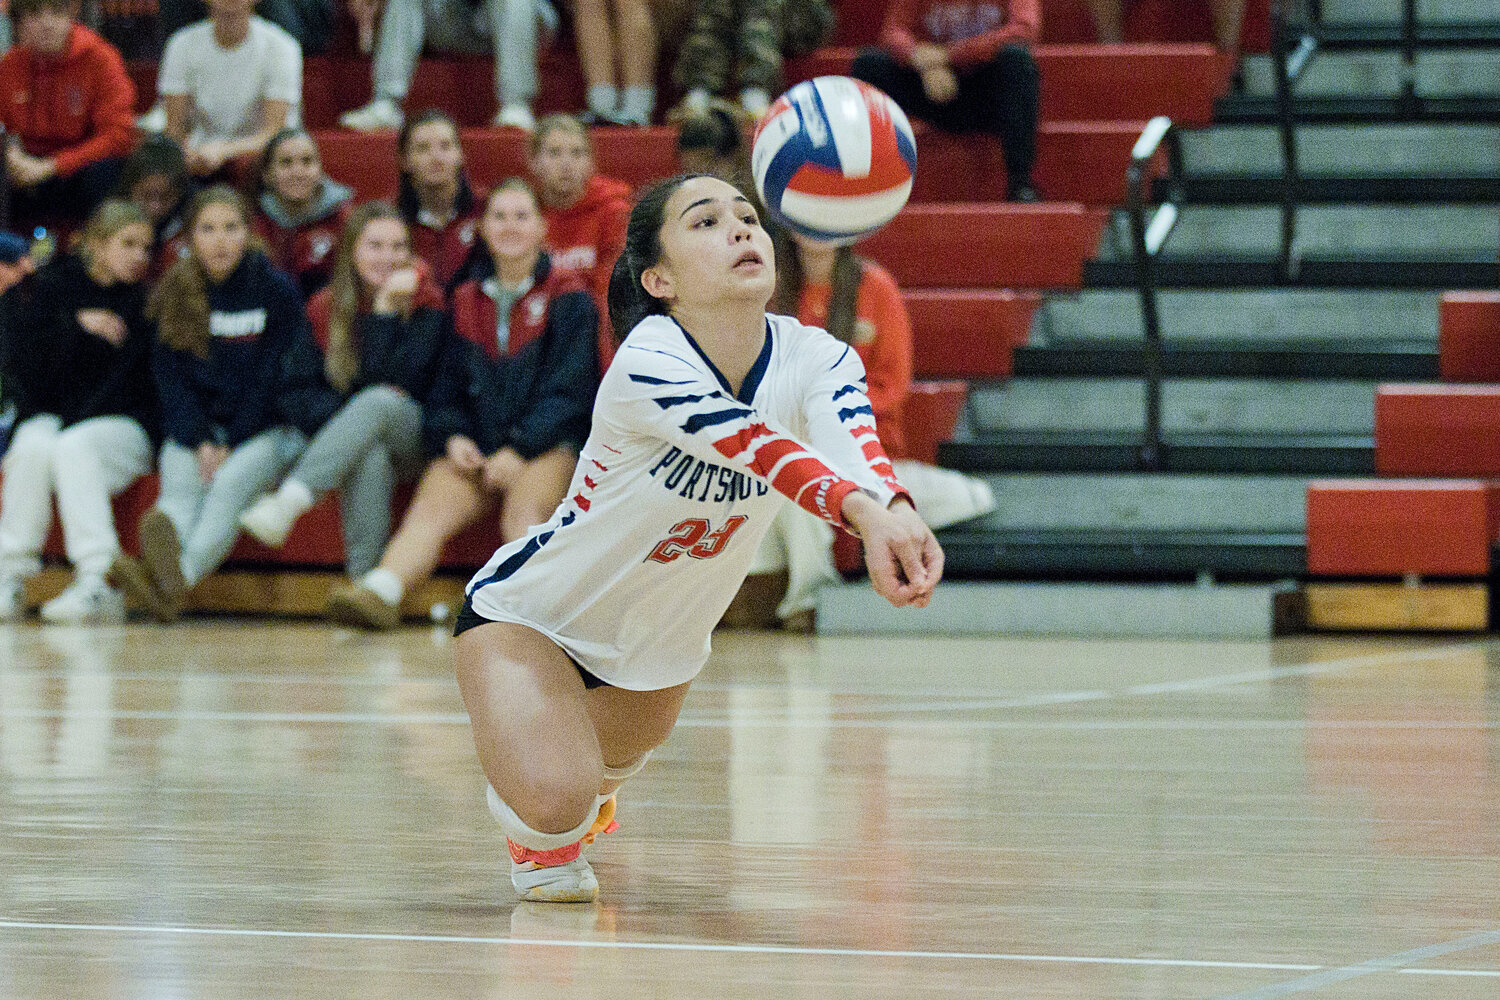 Mila Abedon dives under the ball to keep it in play against the Rams.